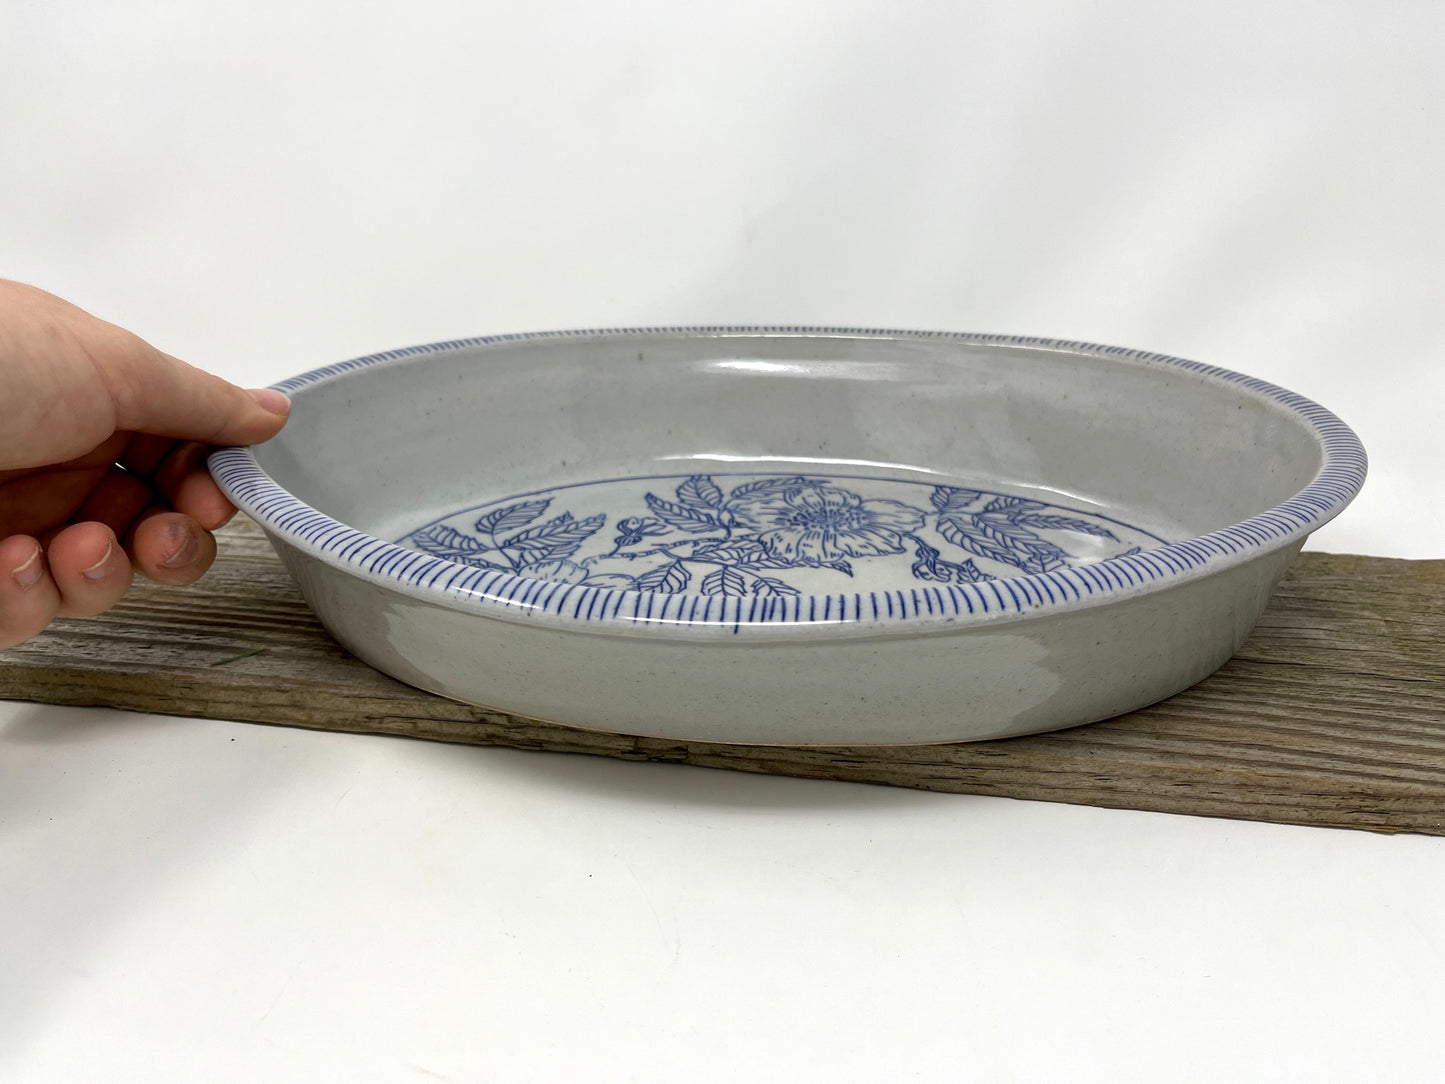 PICK OF THE KILN: Oval Serving Dish with Wild Roses